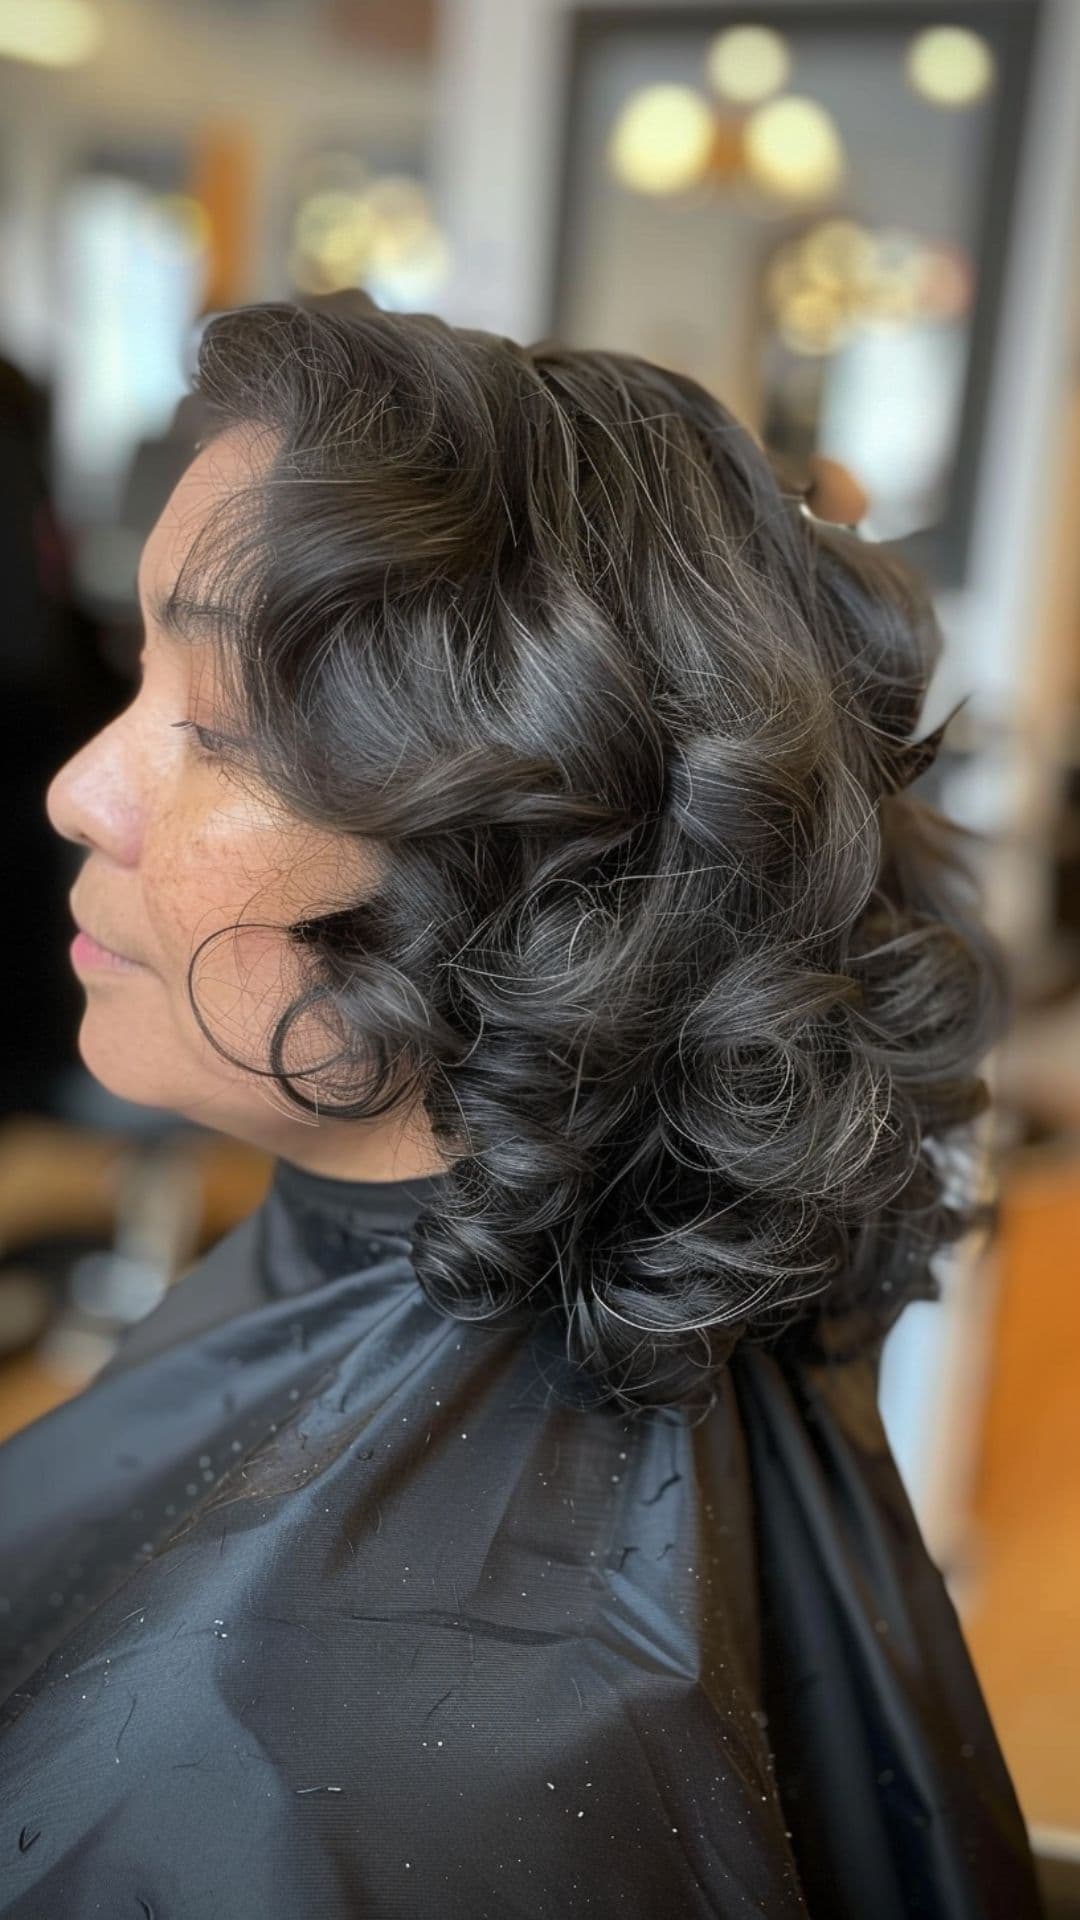 An older woman modelling a medium layered cut with soft curls.